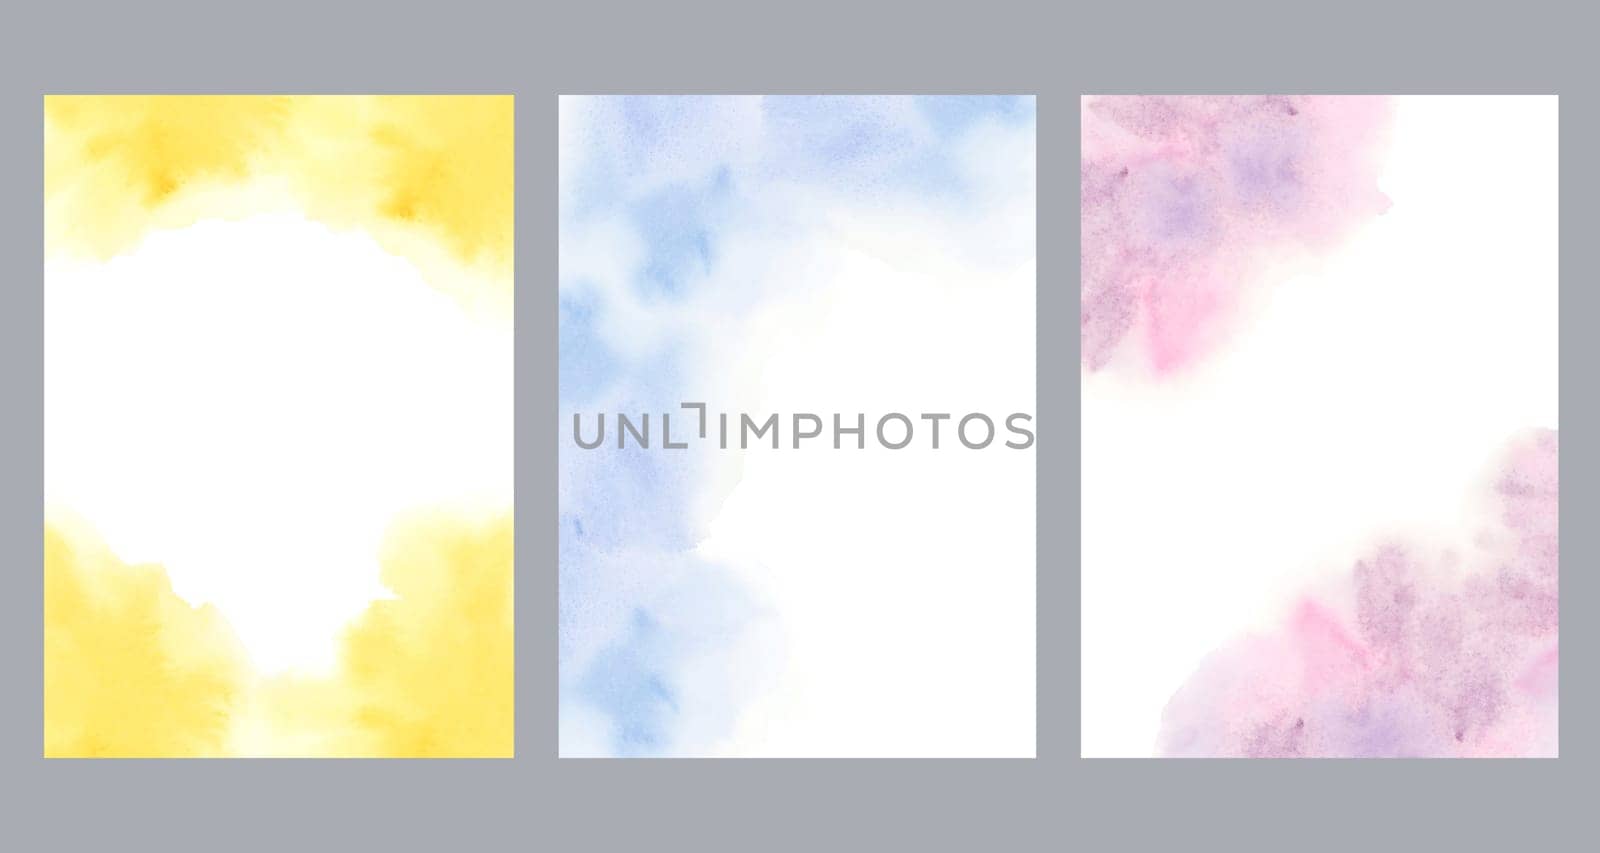 Set of watercolor postcard templates. Dreamy minimalistic abstract flow backgrounds in yellow, blue and pink, liquid cloudy spills for invitation, save the date, wedding, anniversary, sympathy card